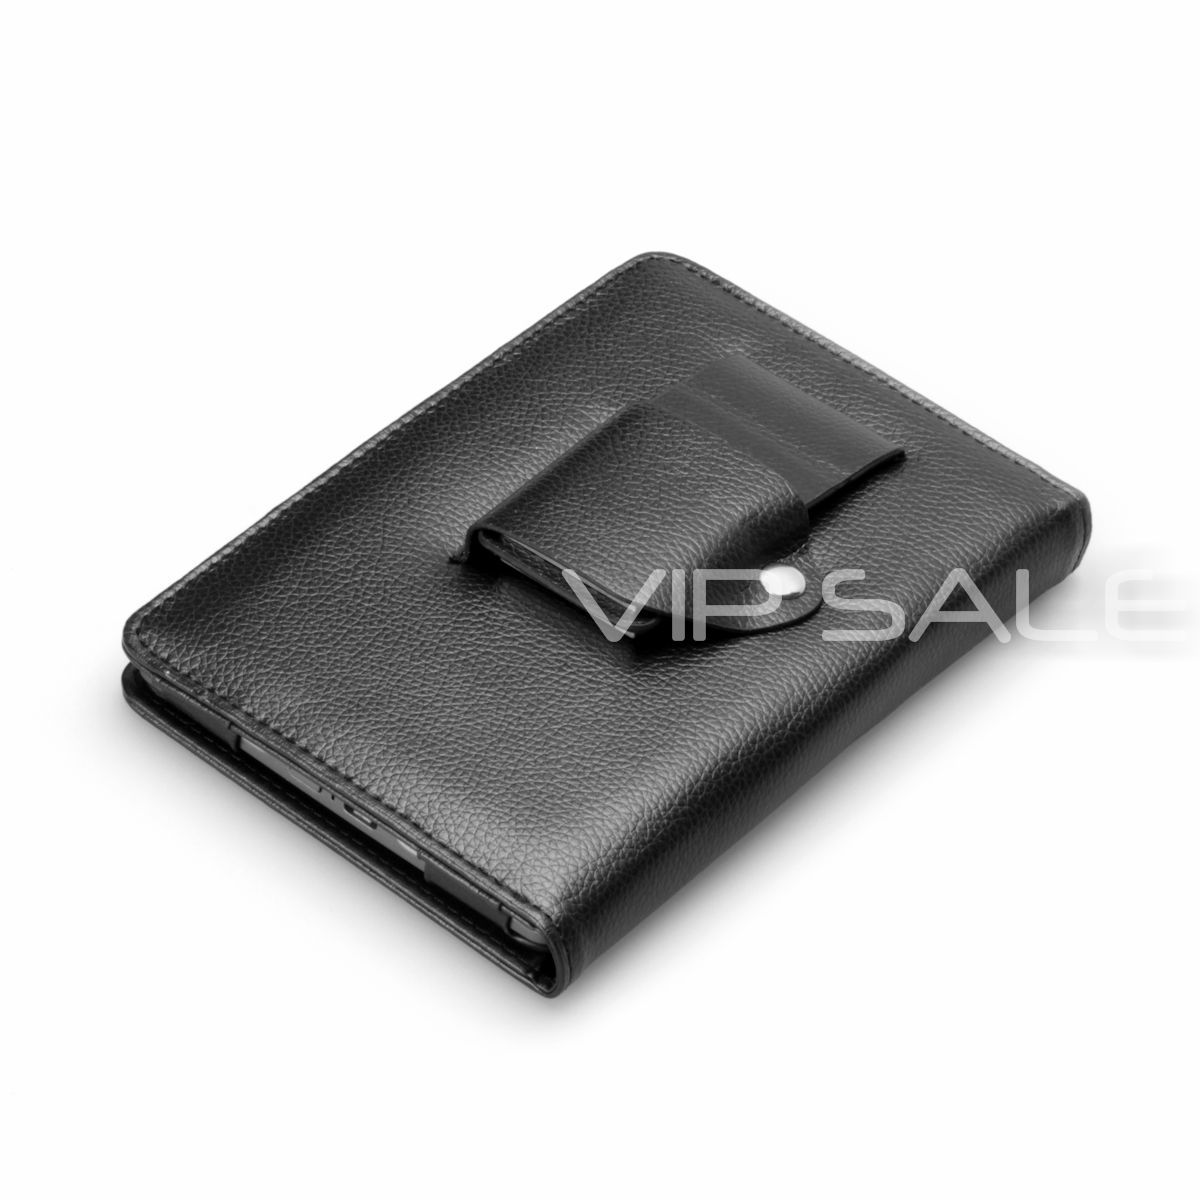 Kindle Touch Black Leather Cover Case with Built in LED Reading Light